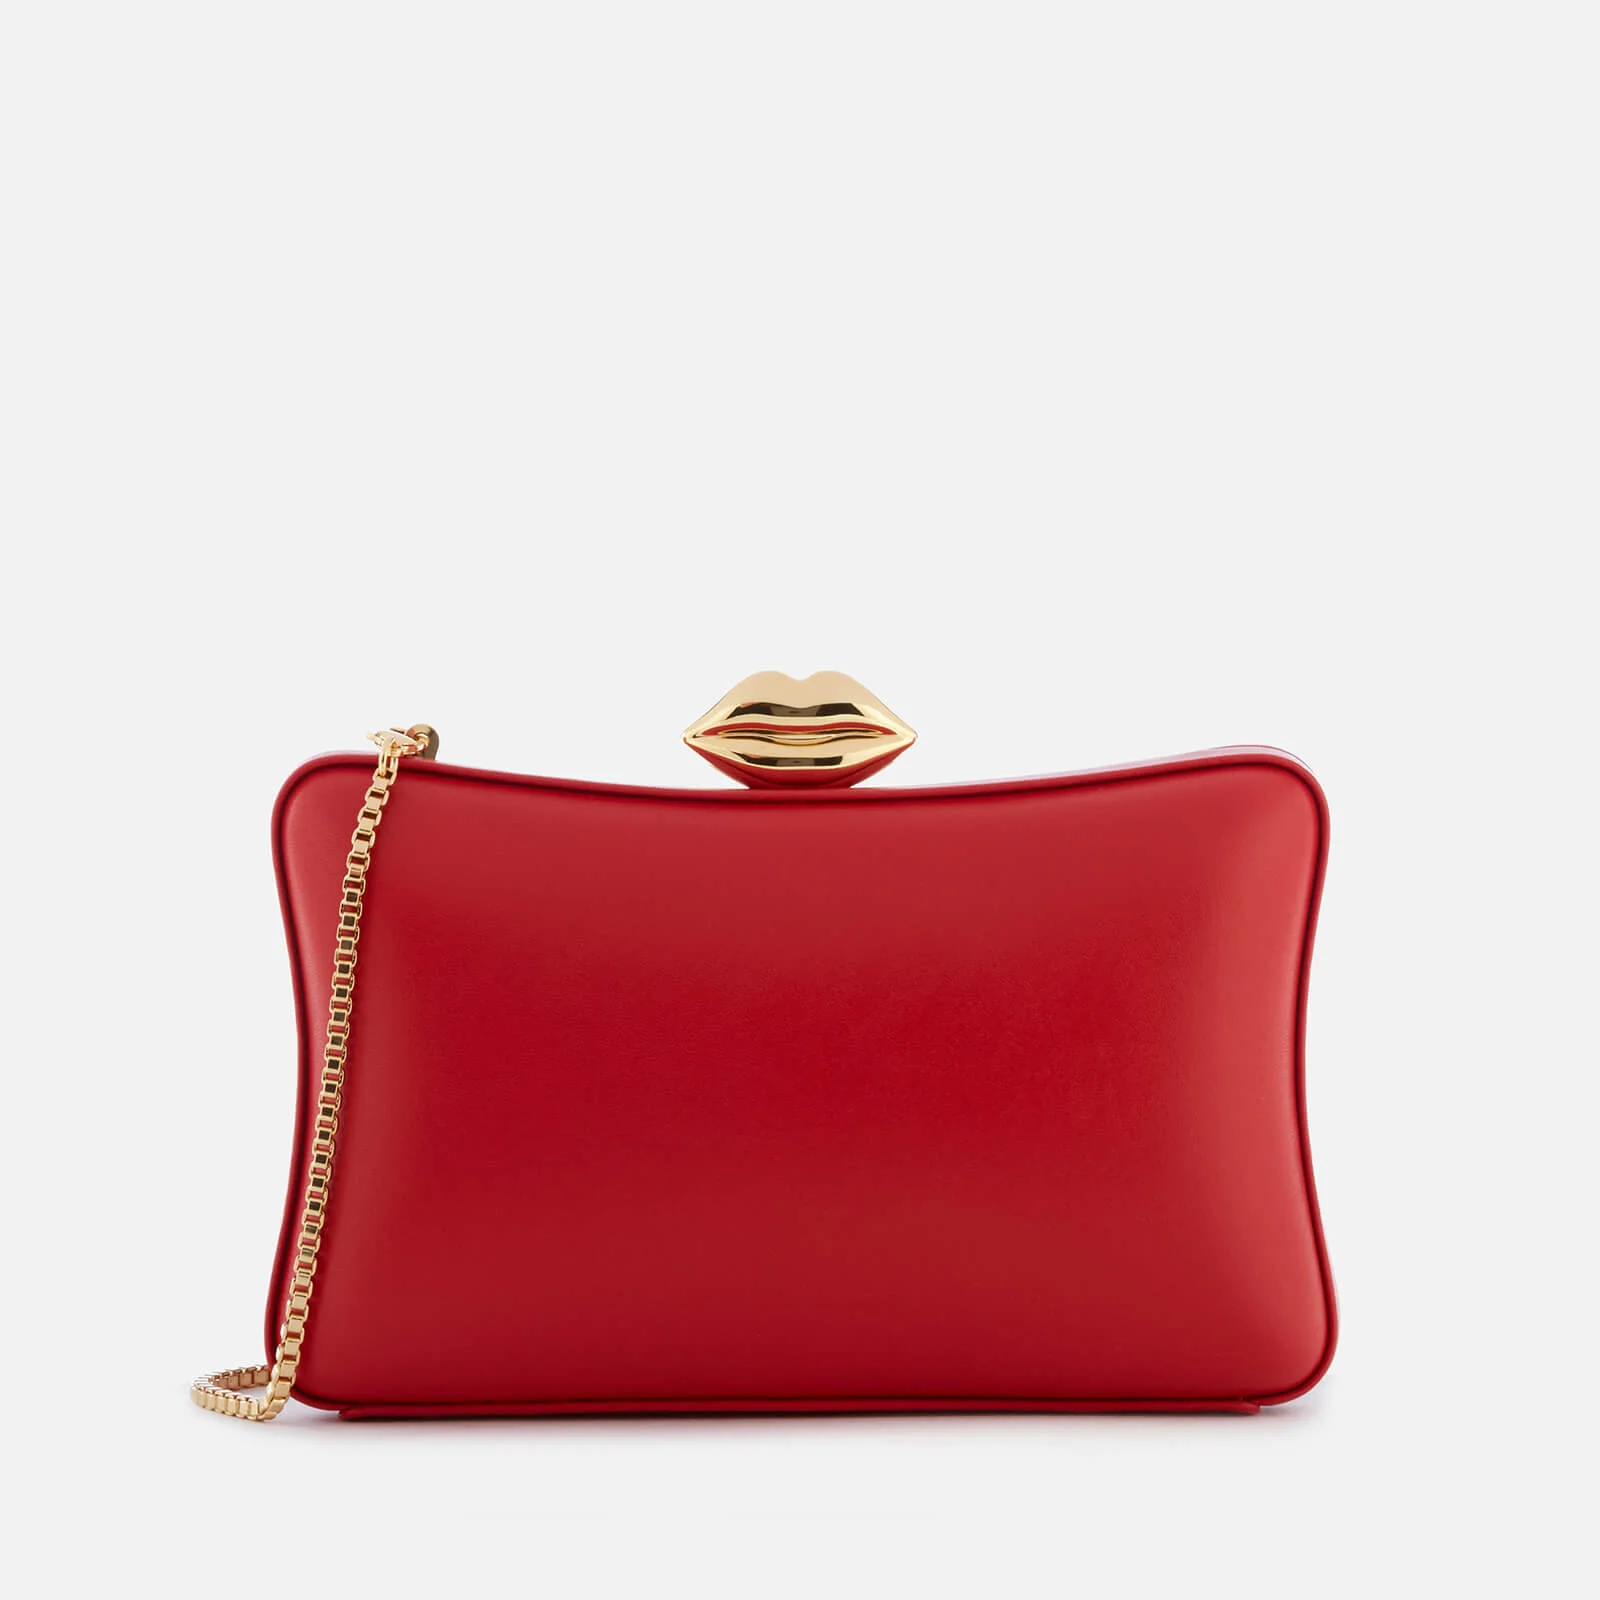 Lulu Guinness Women's Smooth Leather Lavinia Bag - Red Image 1